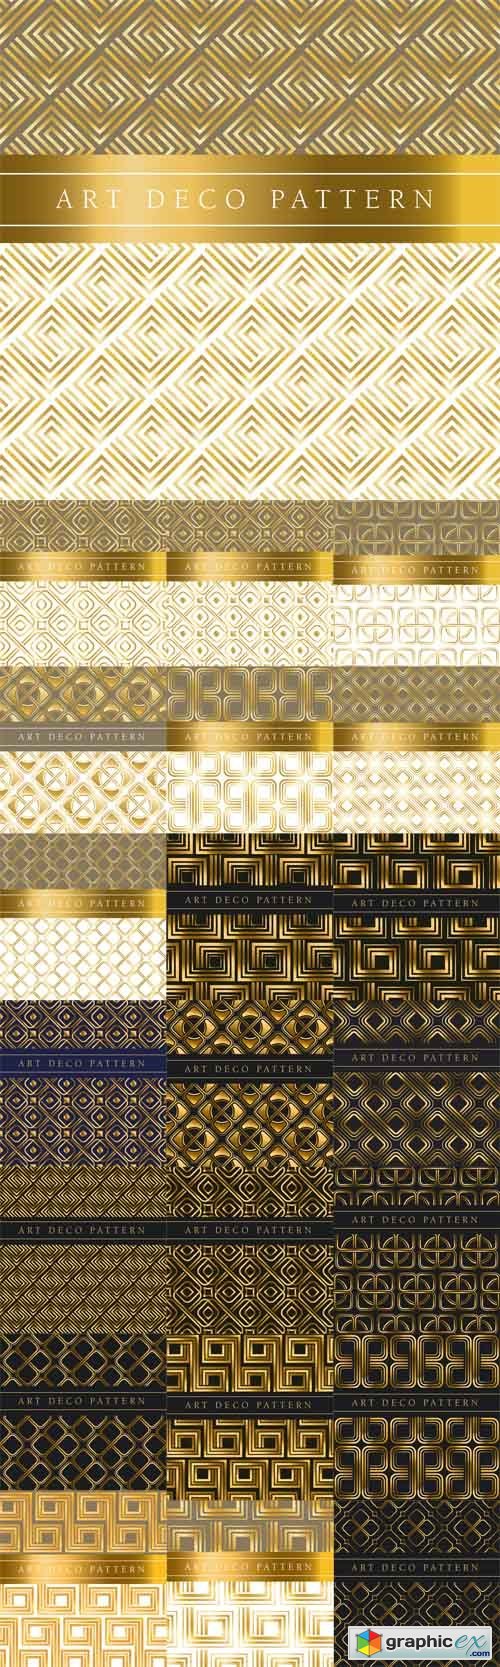 Black and Gold Seamless Pattern in Art Deco Style